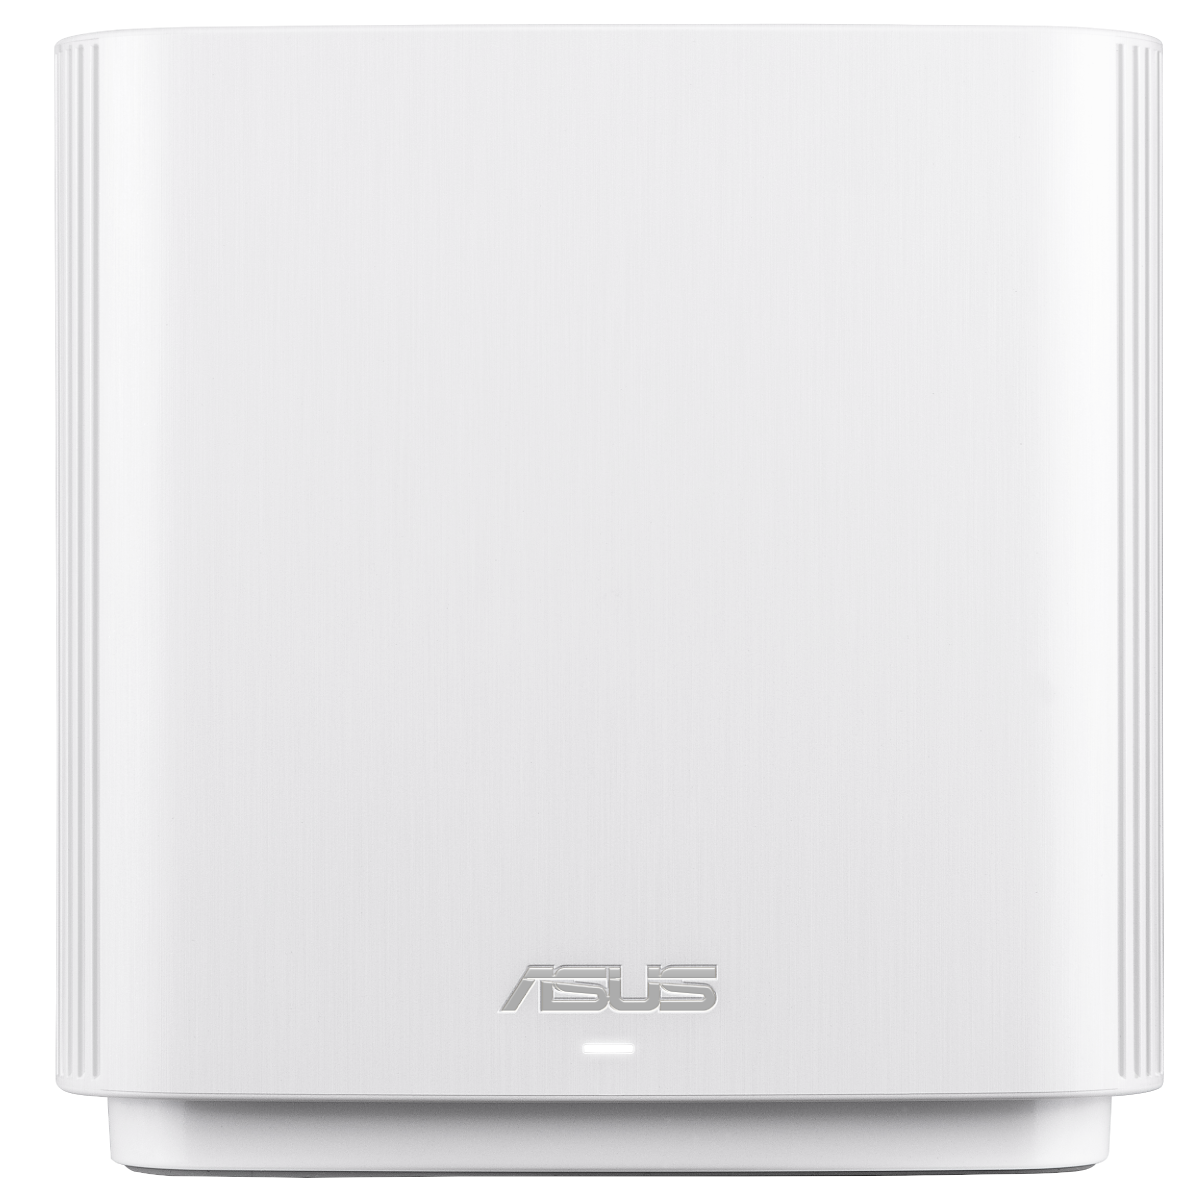 ASUS ZenWifi AC (CT8) AC3000 WiFi 5 Mesh System, Pack of 1 - White